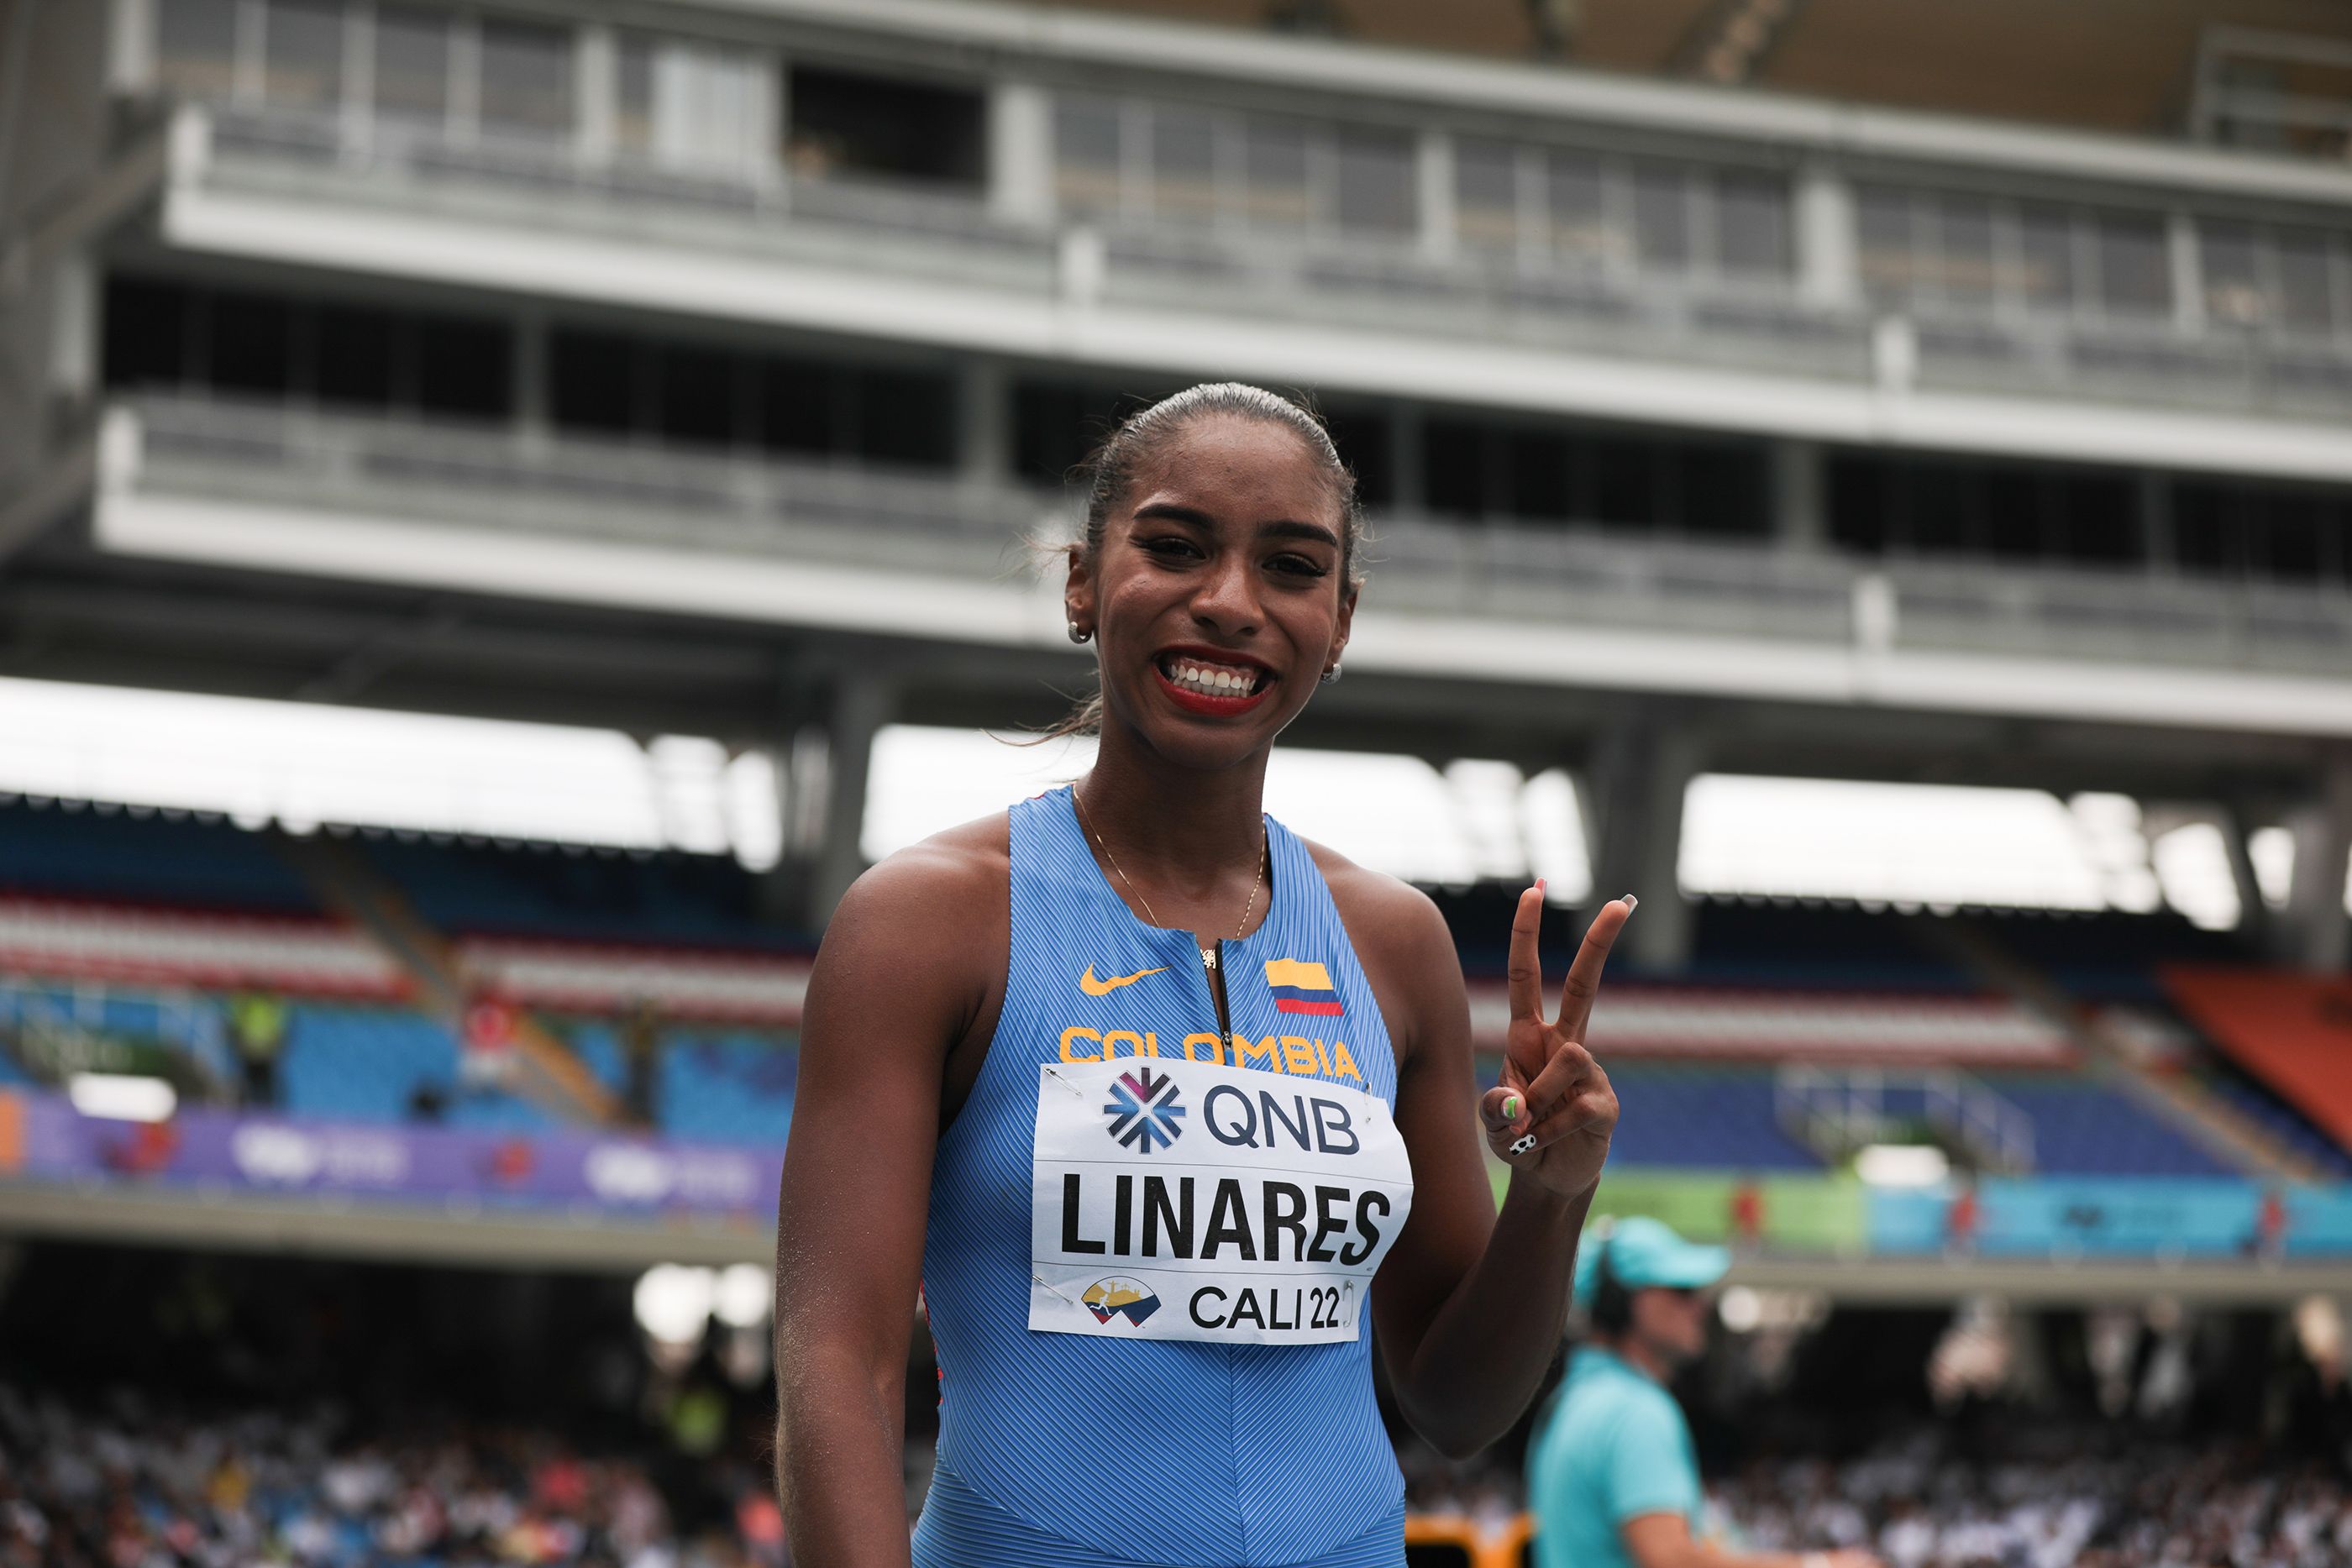 Colombia's Natalia Linares celebrates her qualification for the long jump final at the World U20 Championships Cali 22